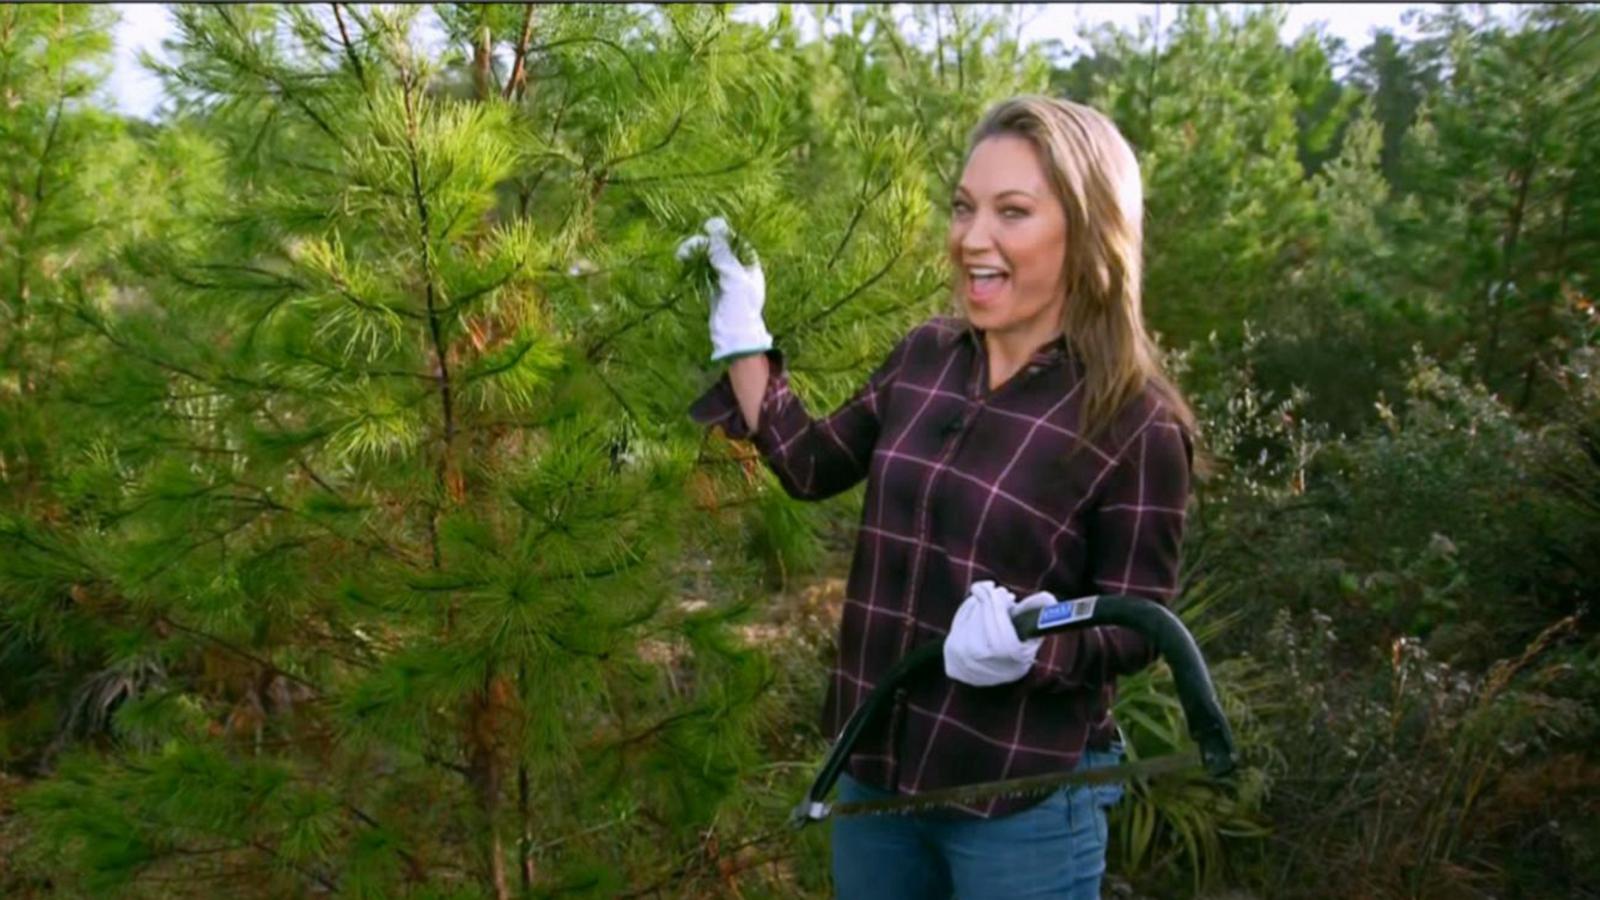 How to get a Christmas tree for $10 or less - Good Morning America